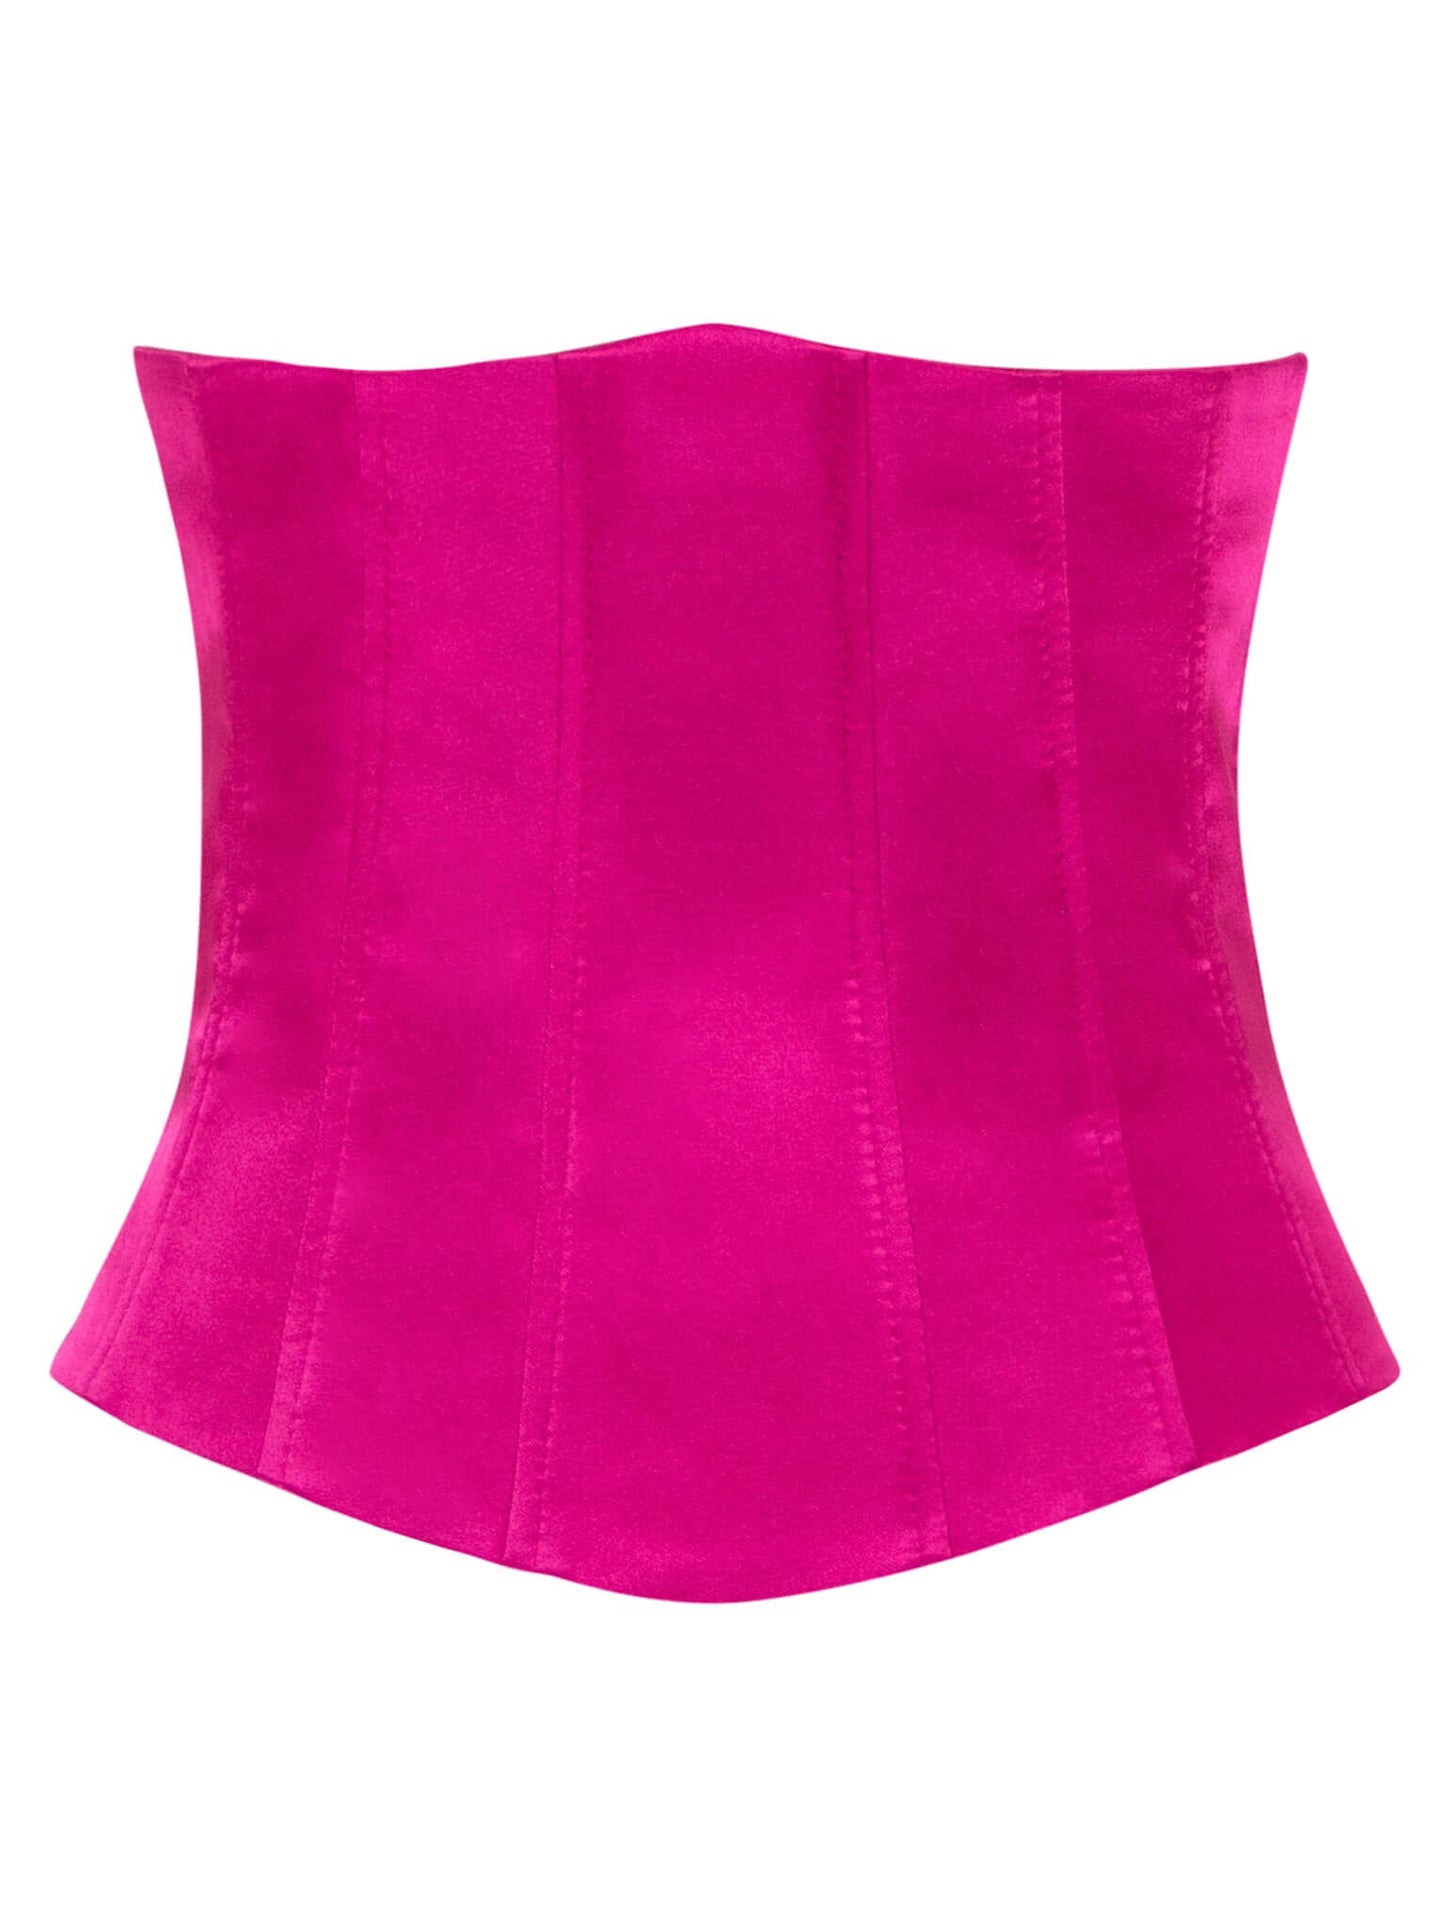 Vision of Love Fitted Corset Belt - Pink Tia Dorraine